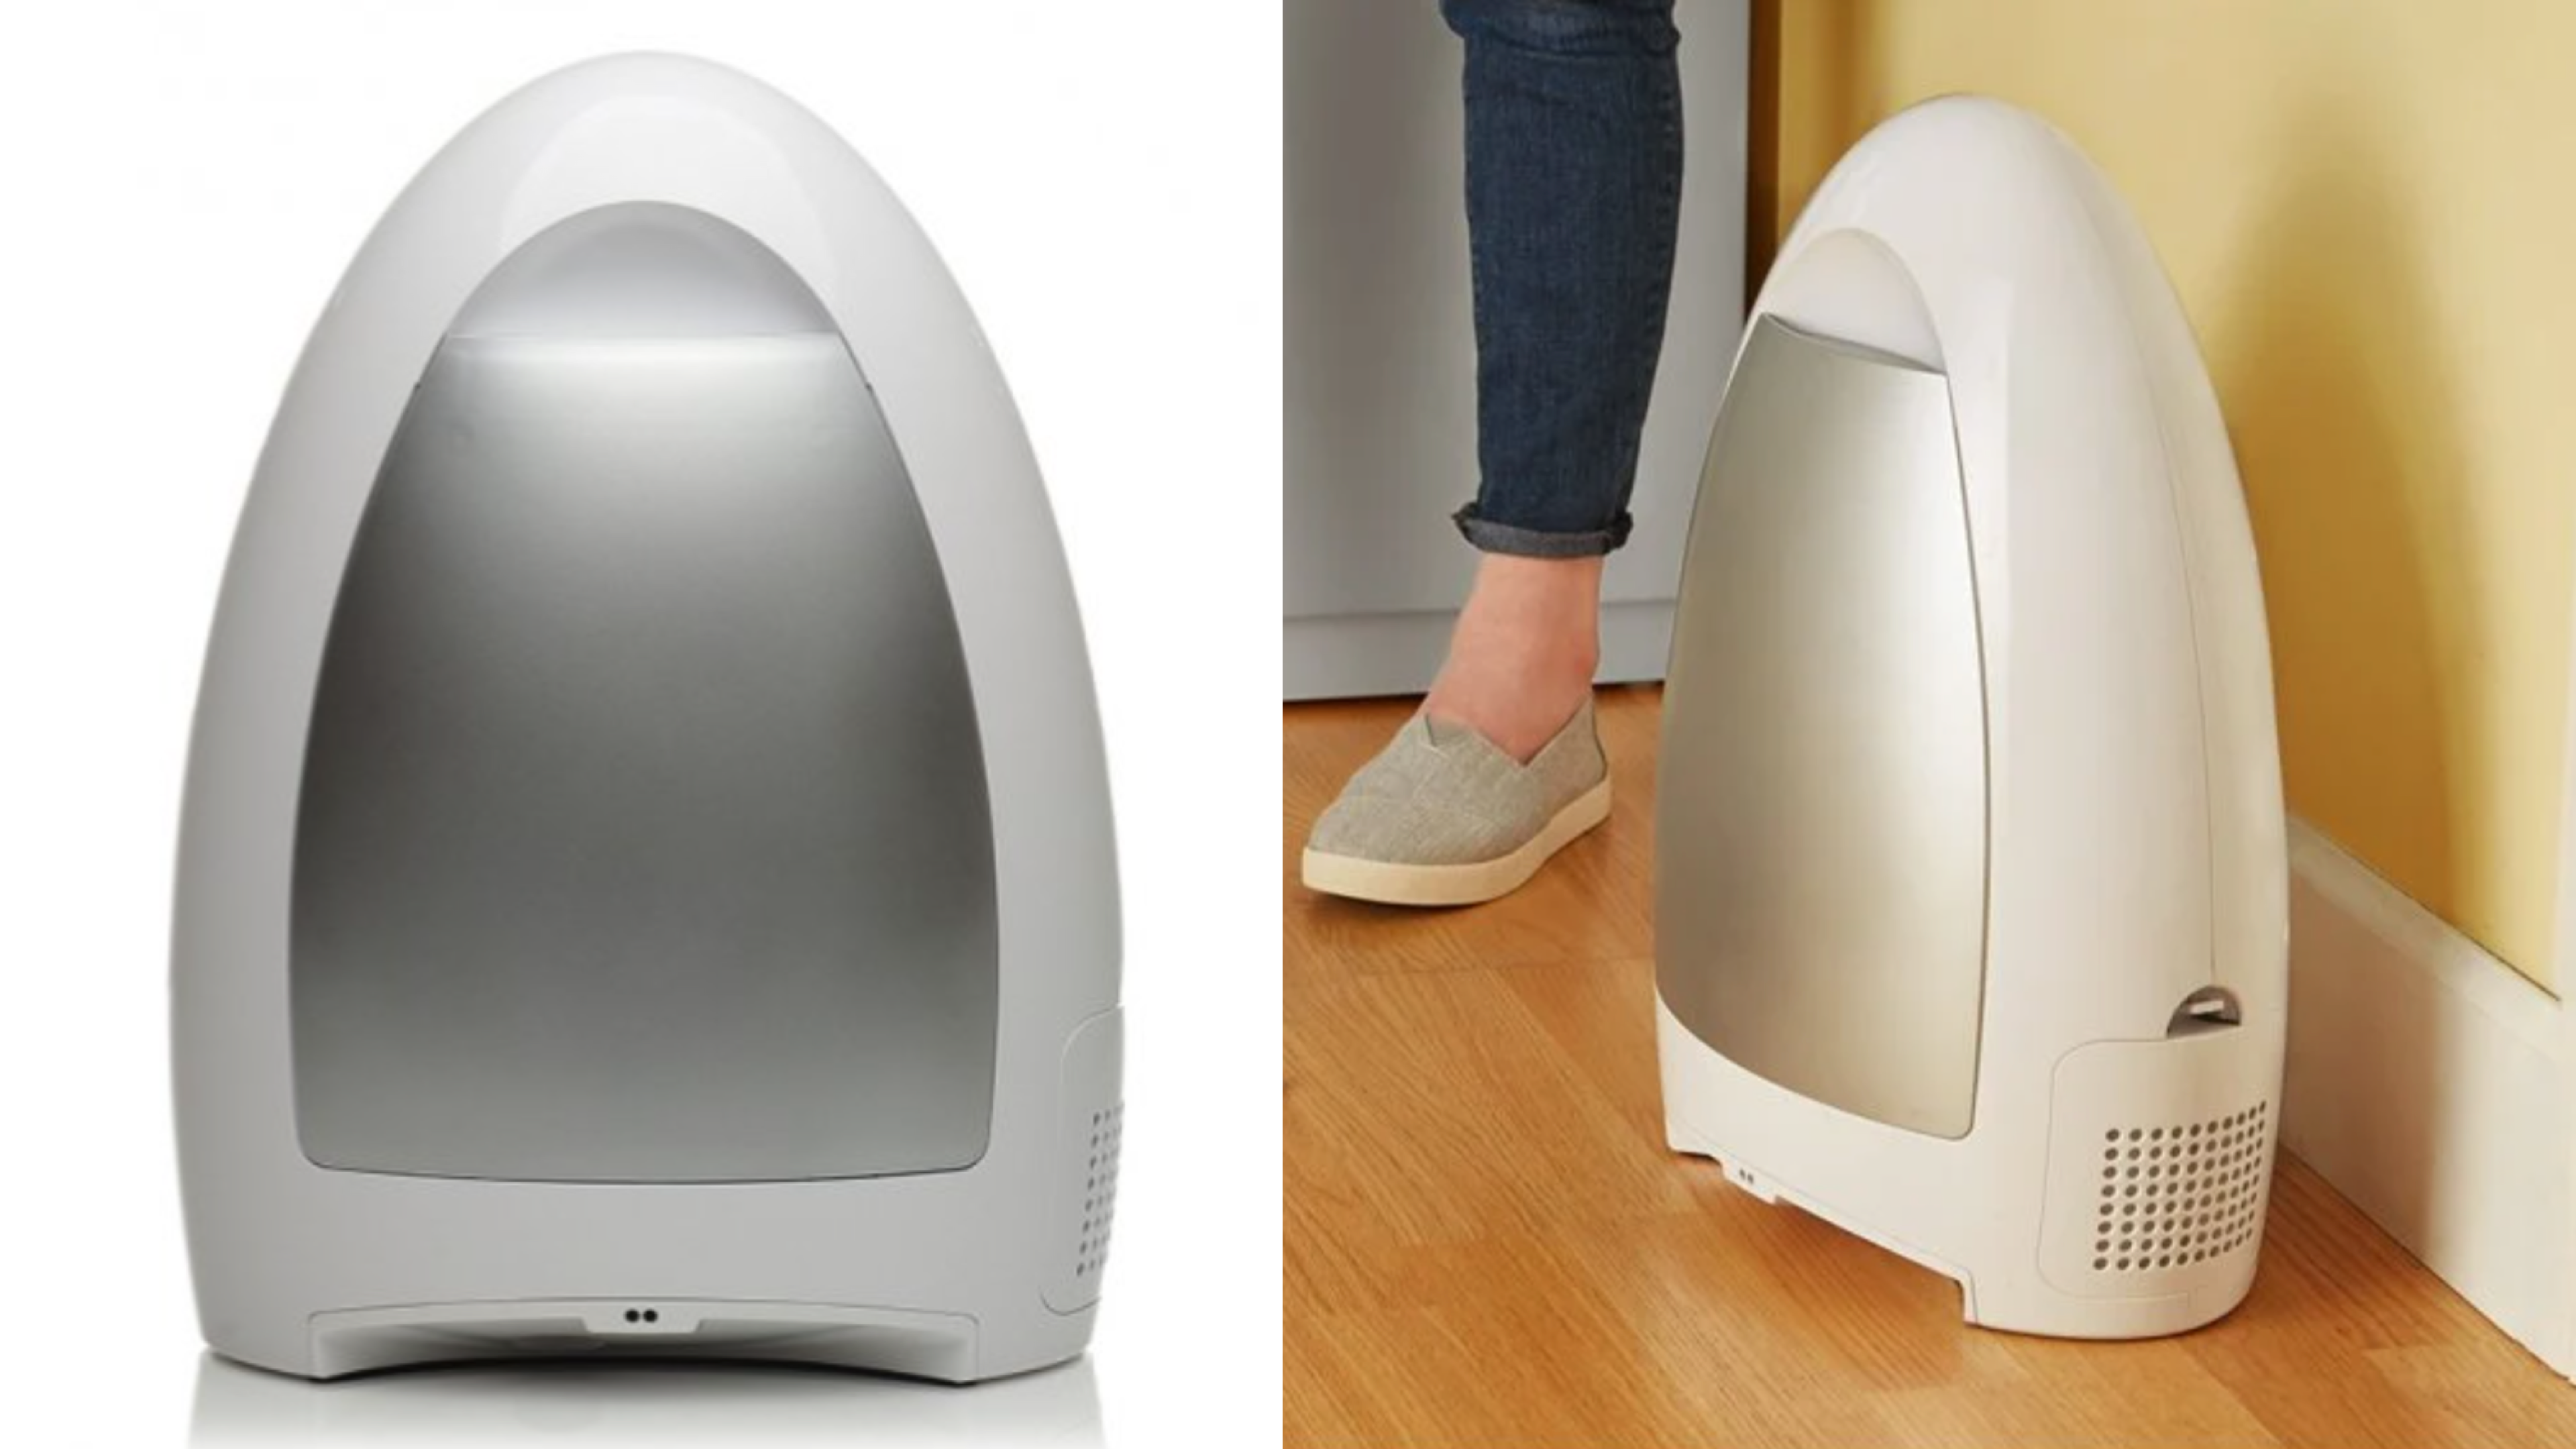 touchless standing vacuum that can suck up dirt and dust